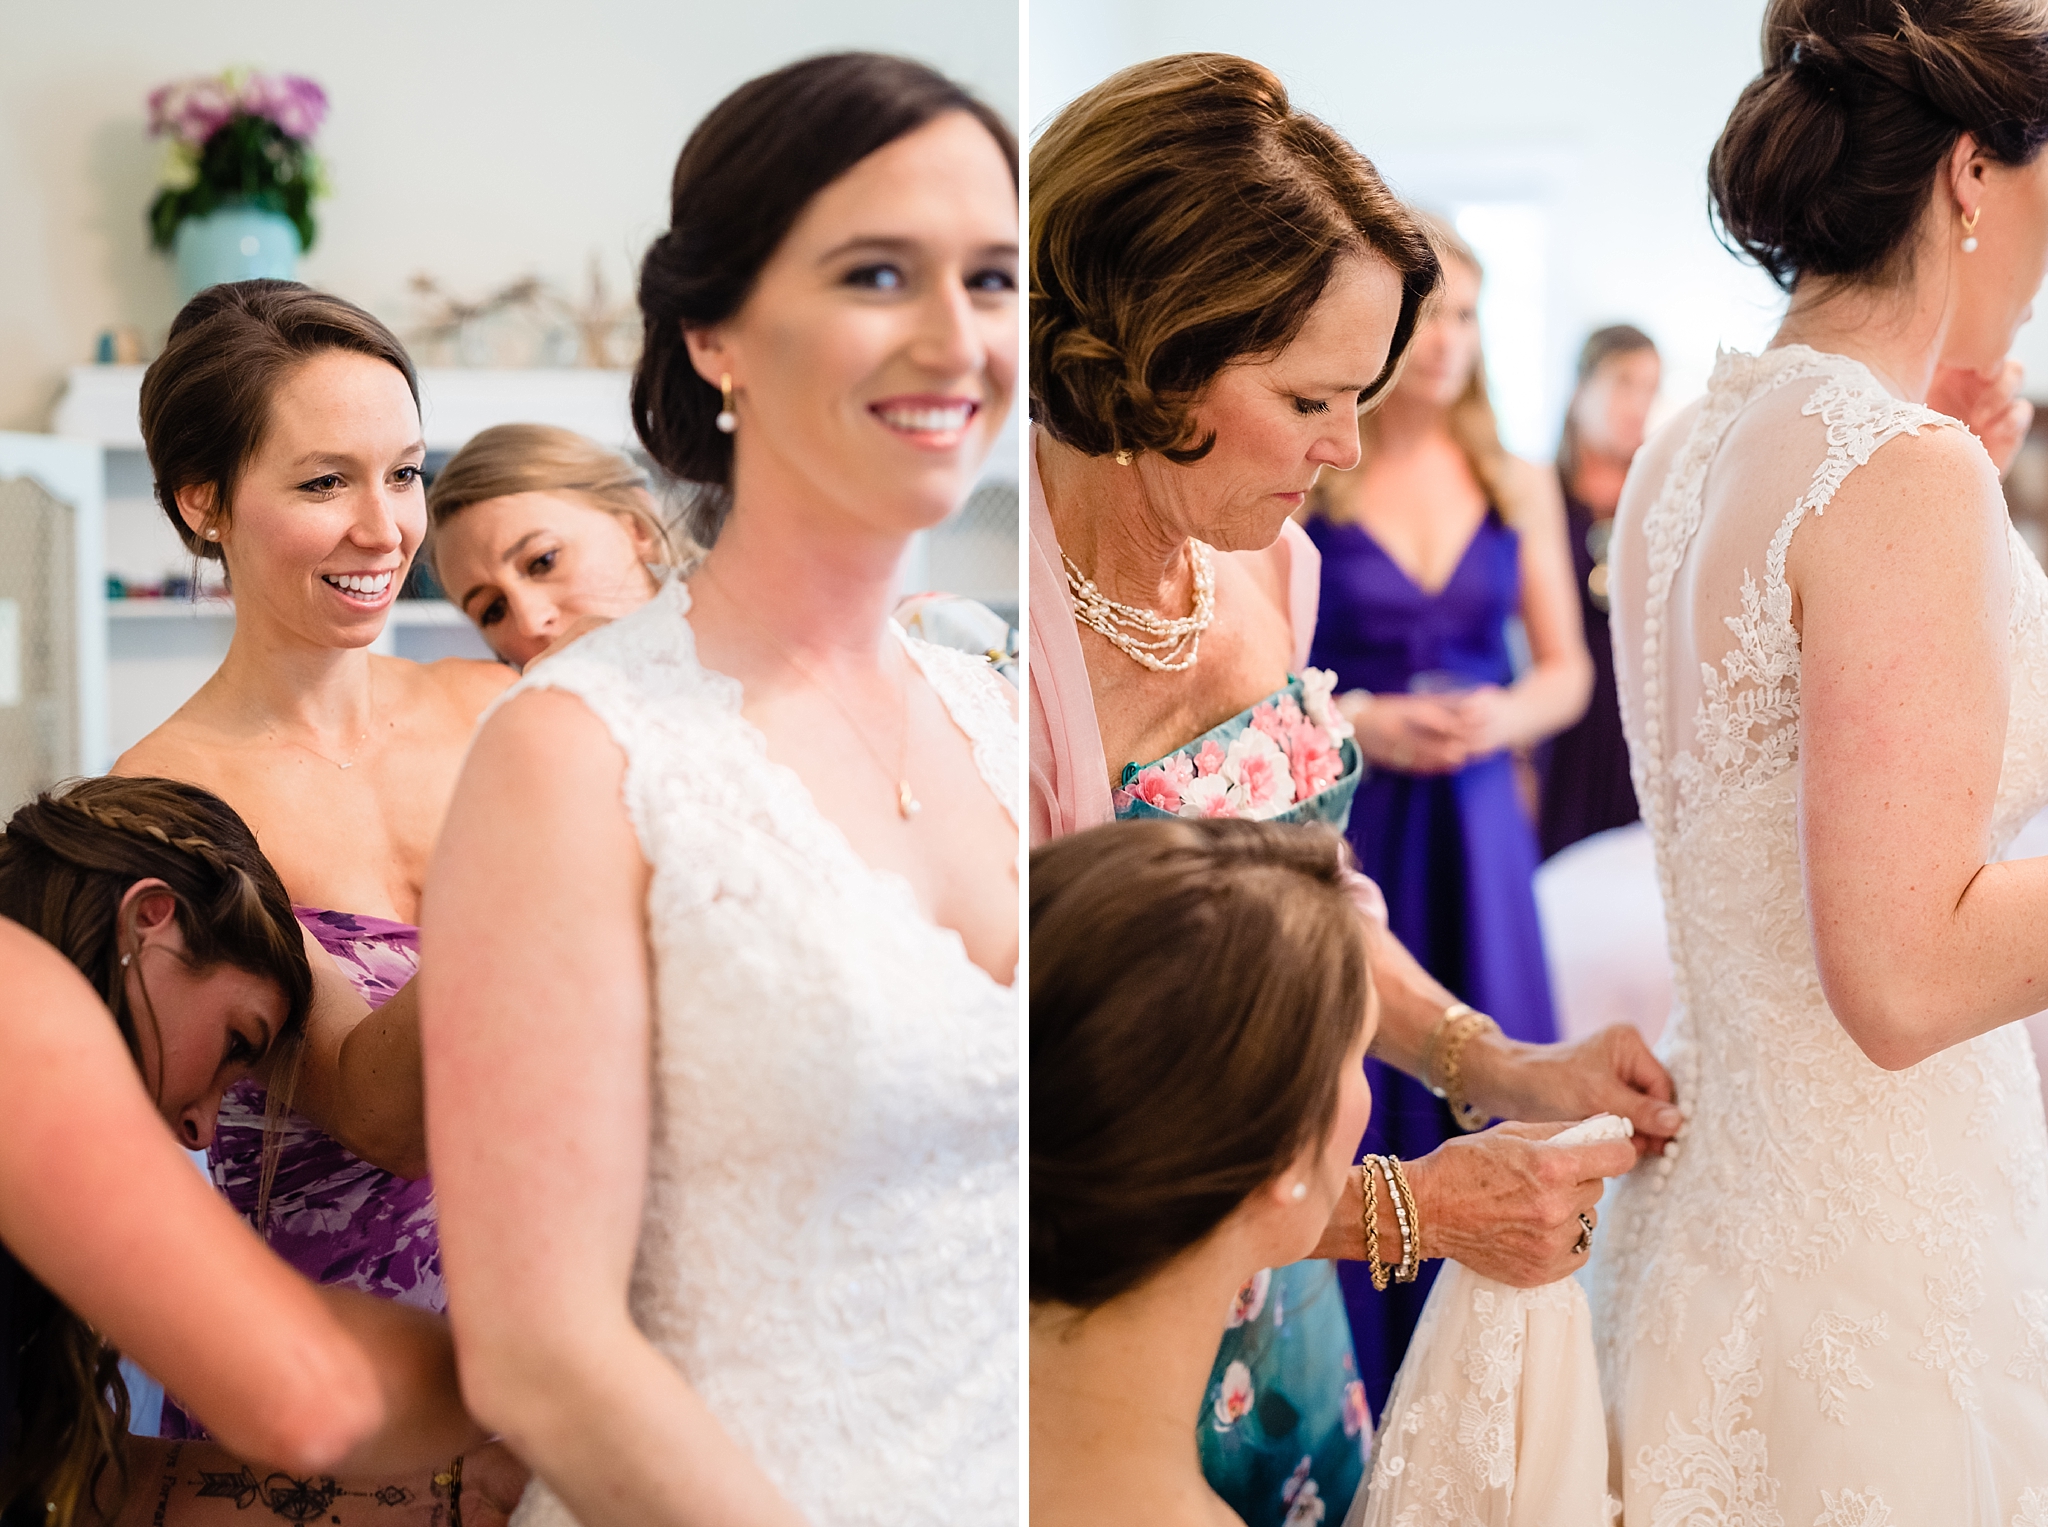 Mom and sister helping bride